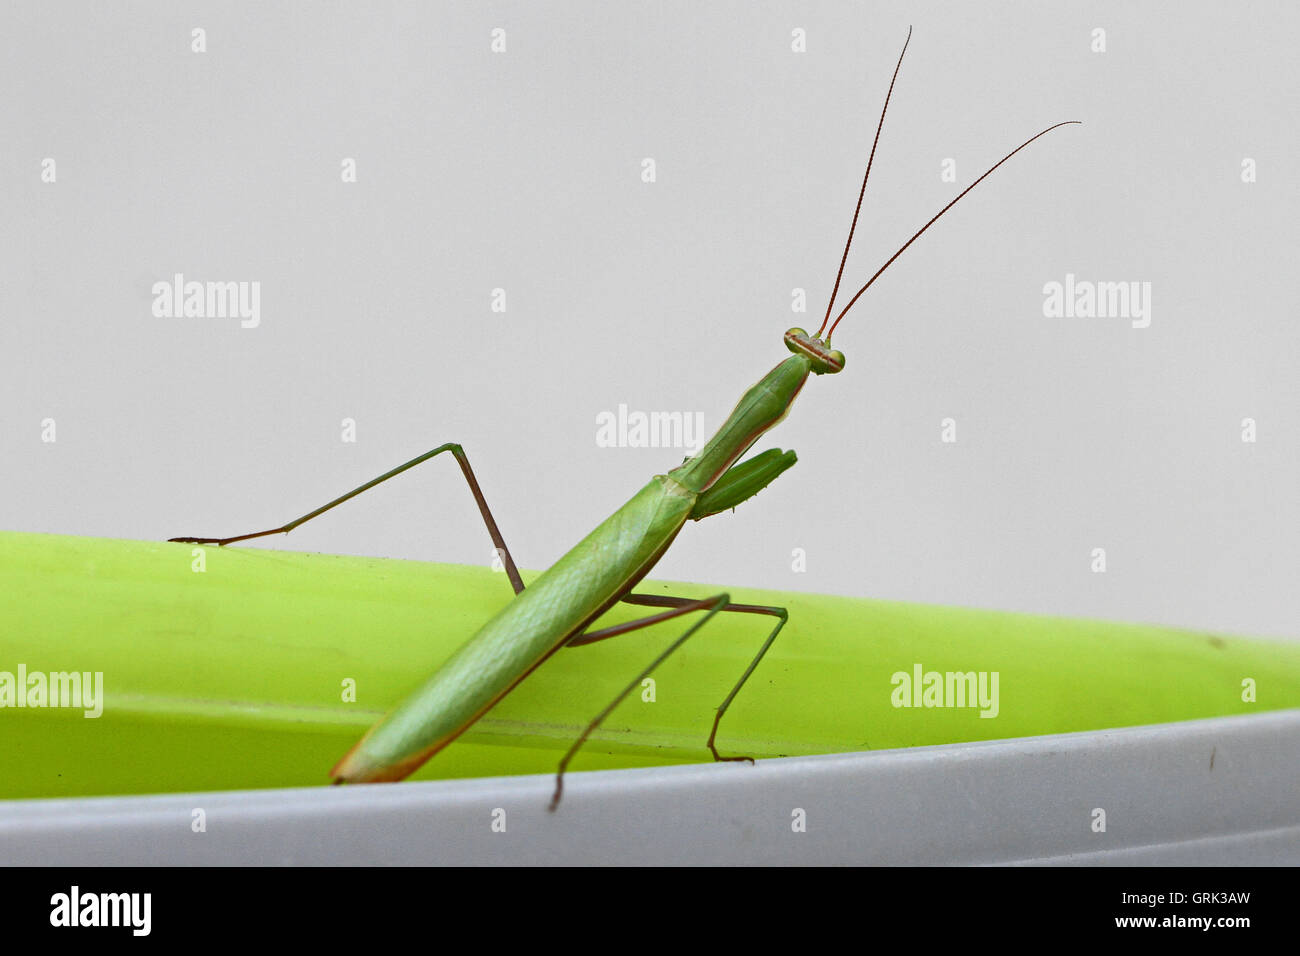 Praying mantis or mantid close up Latin name mantis religiosa settled on a green bucket in Italy by Ruth Swan Stock Photo